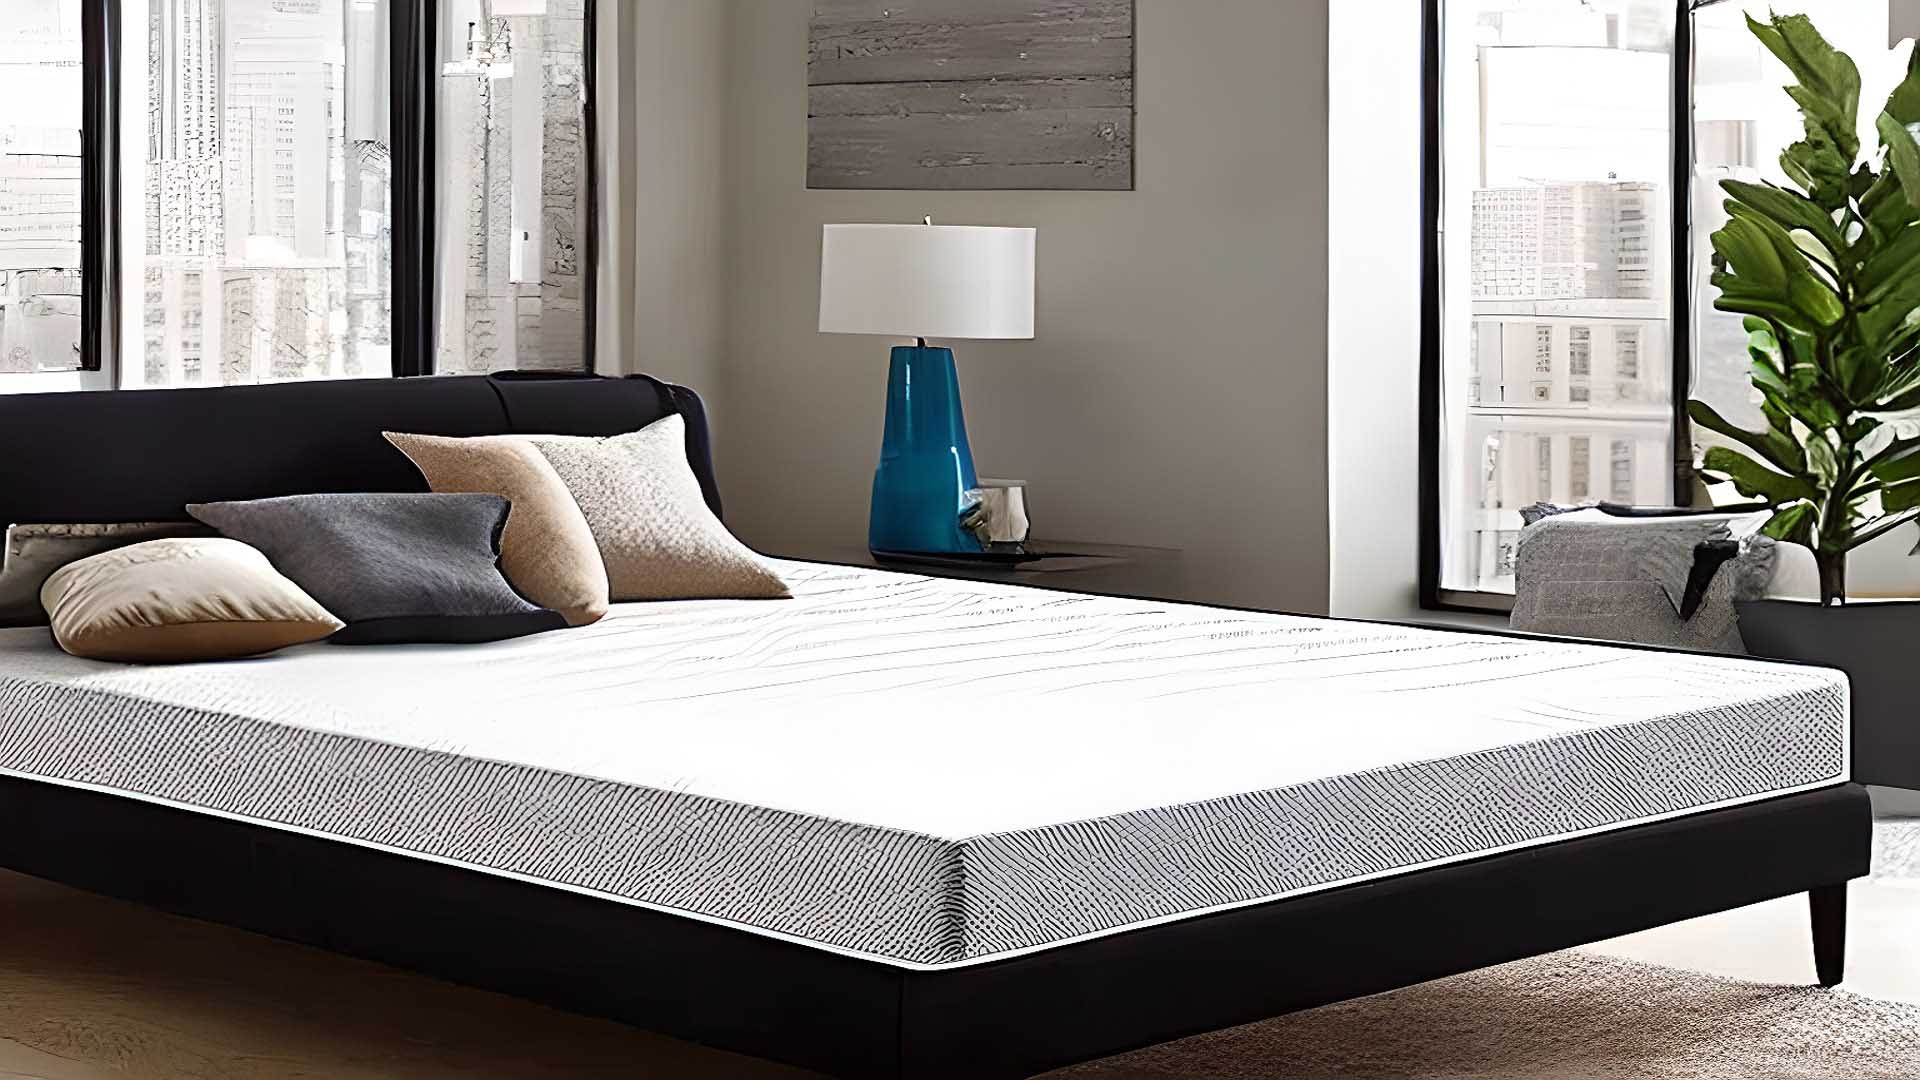 Mattress Sales & Deals in Yonkers, NY